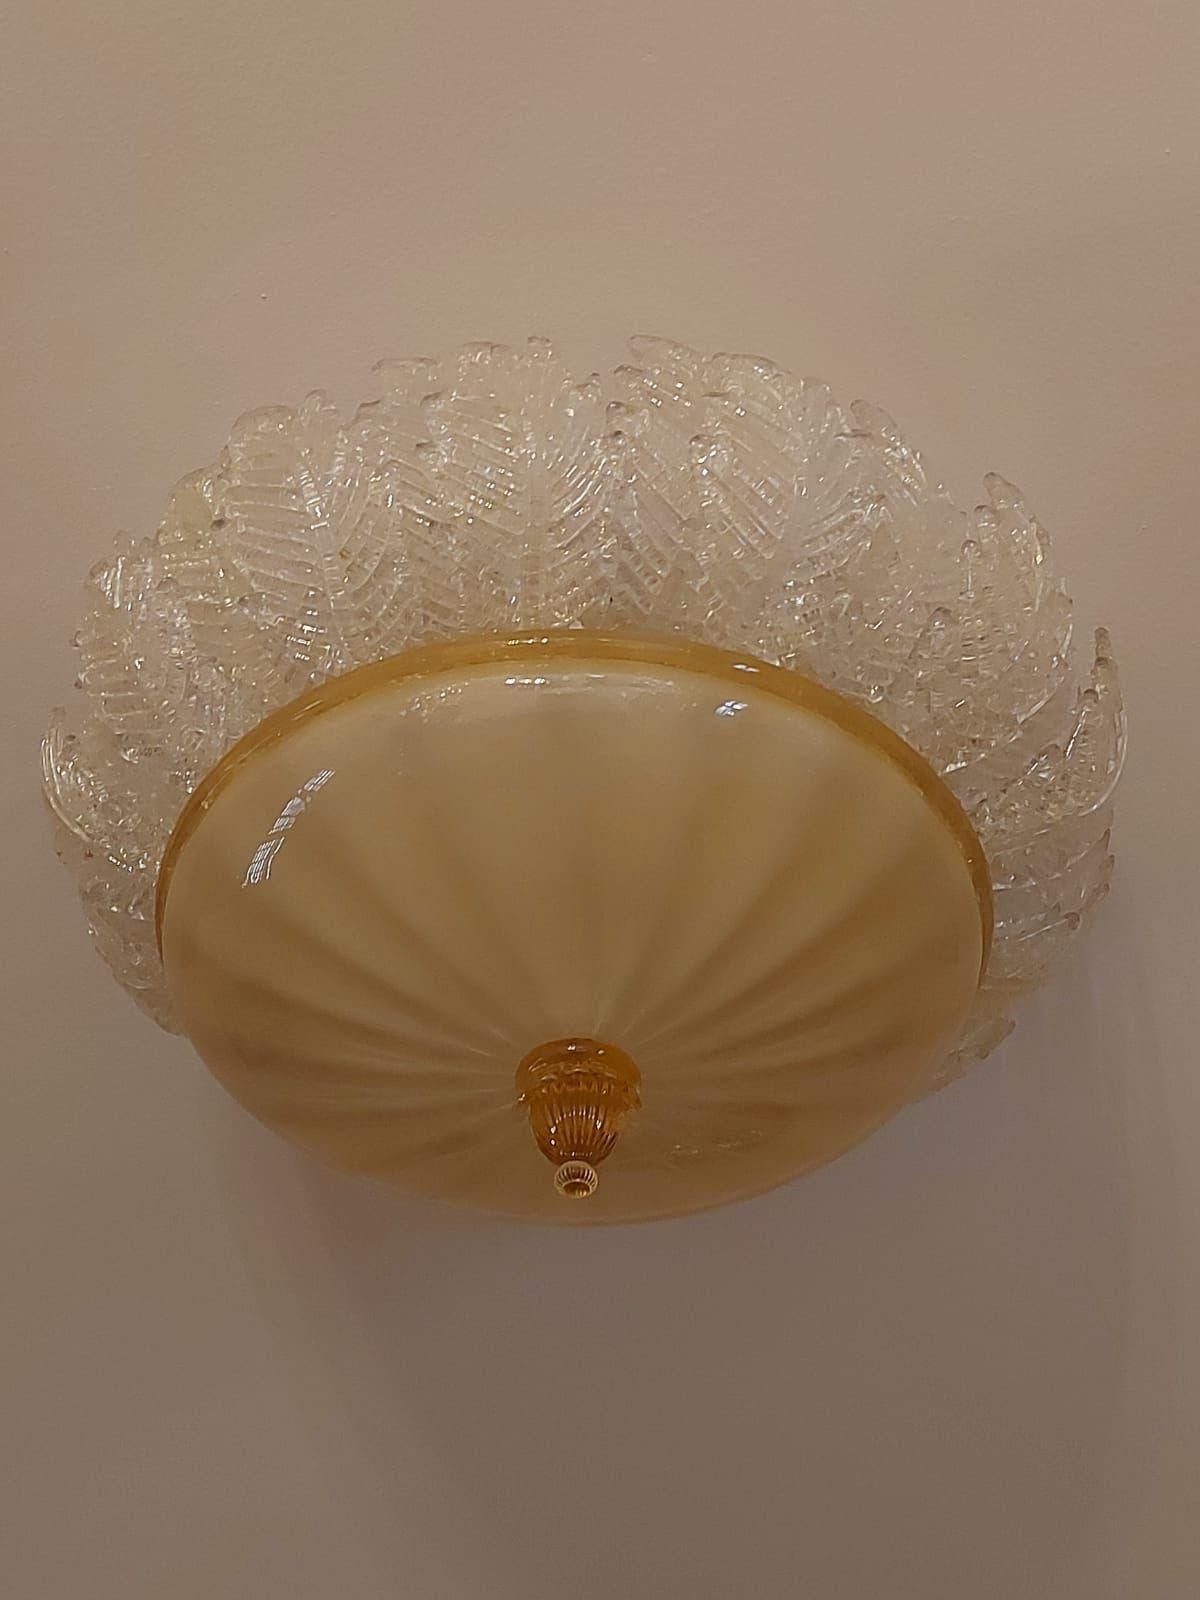 Barovier Ceiling Lamp with Gold Inclusion, Italy 1930s For Sale 2